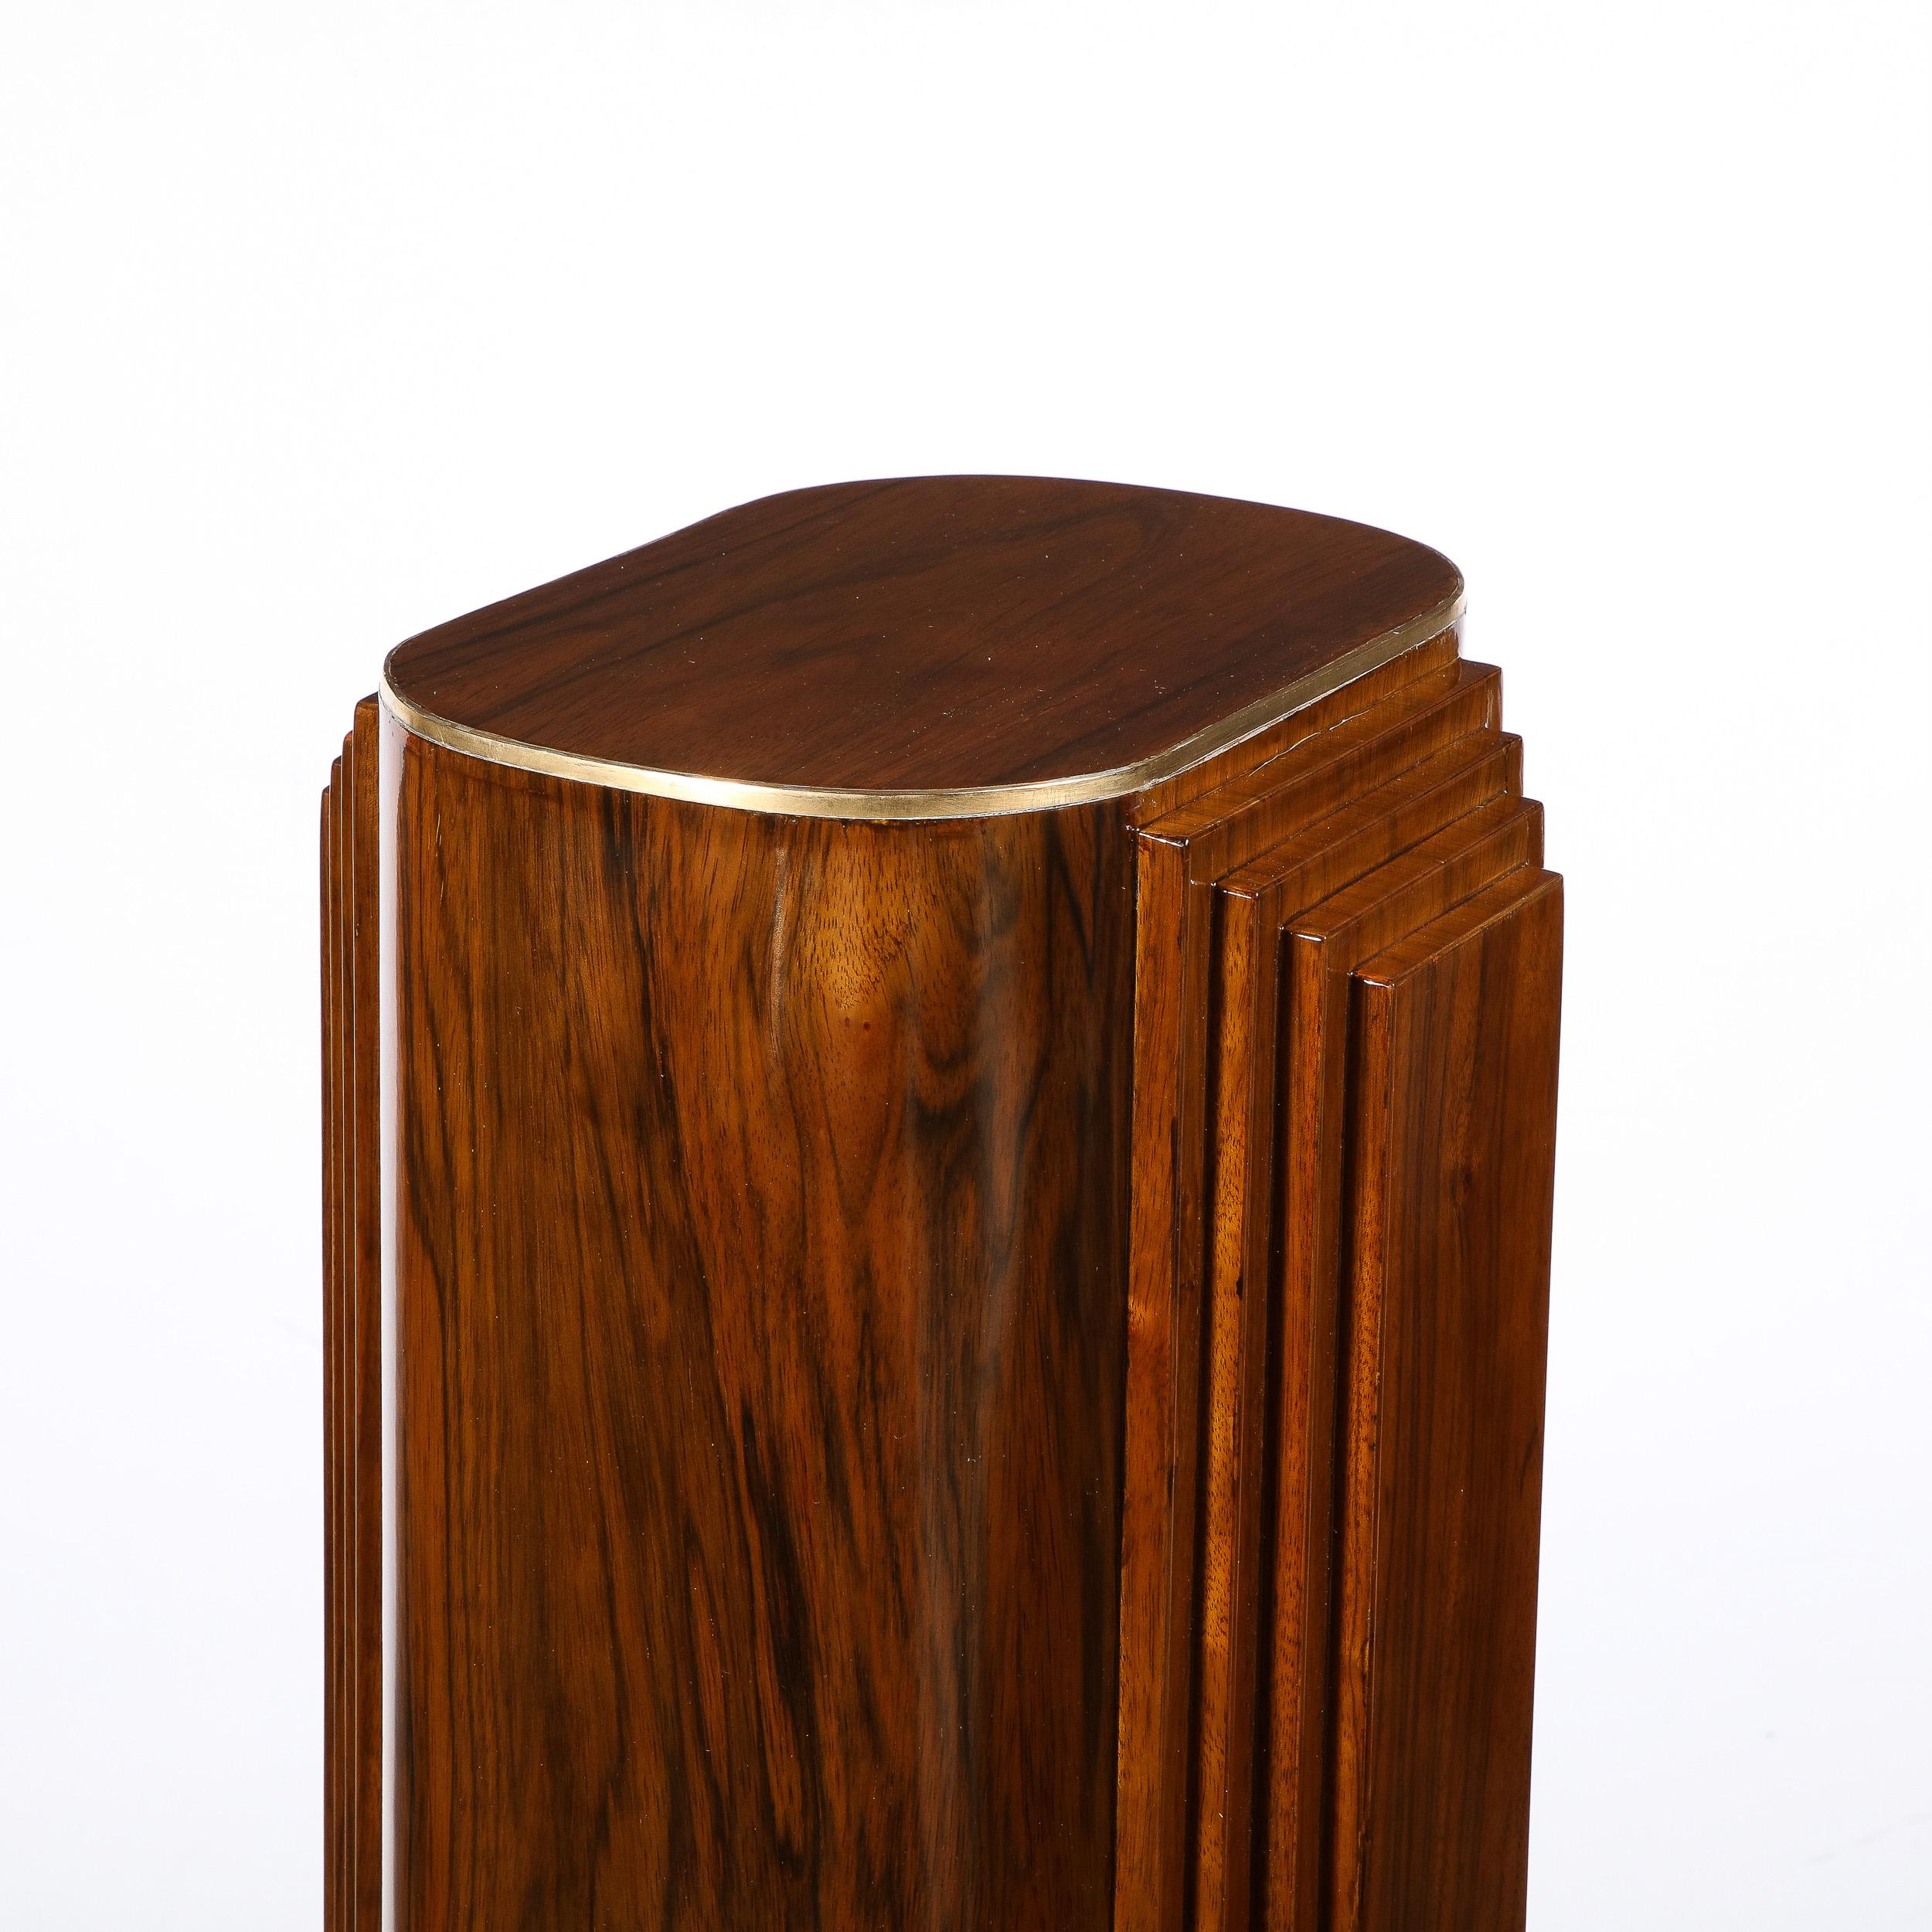 Art Deco Skyscraper Hand-rubbed Book-matched Walnut Pedestal w/ Brass Inlays For Sale 1